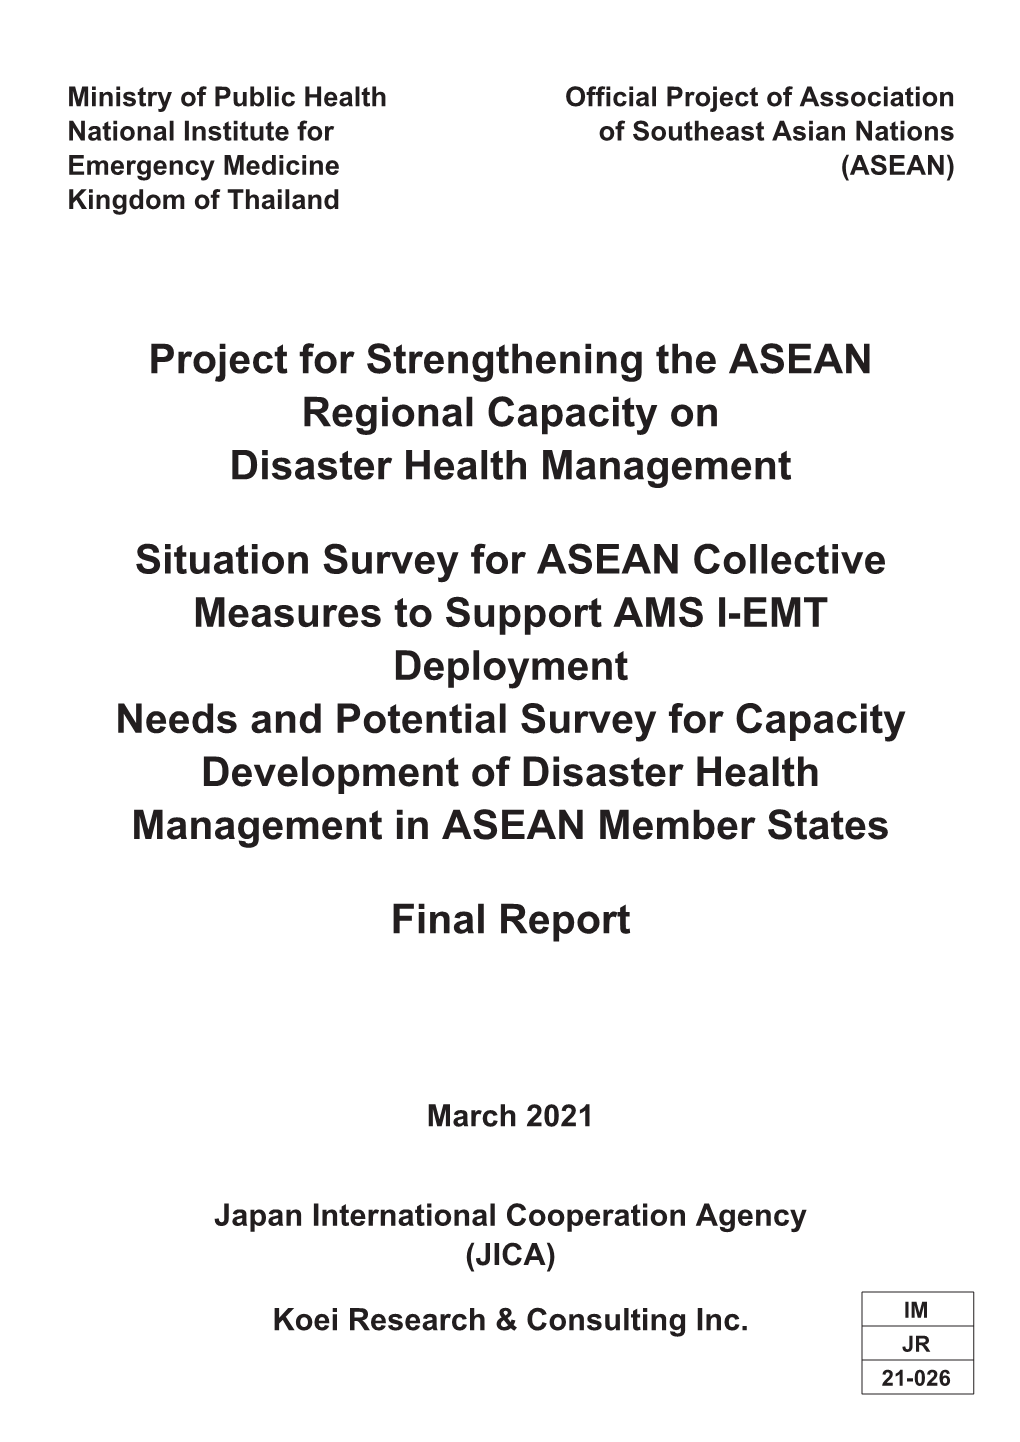 Project for Strengthening the ASEAN Regional Capacity on Disaster Health Management